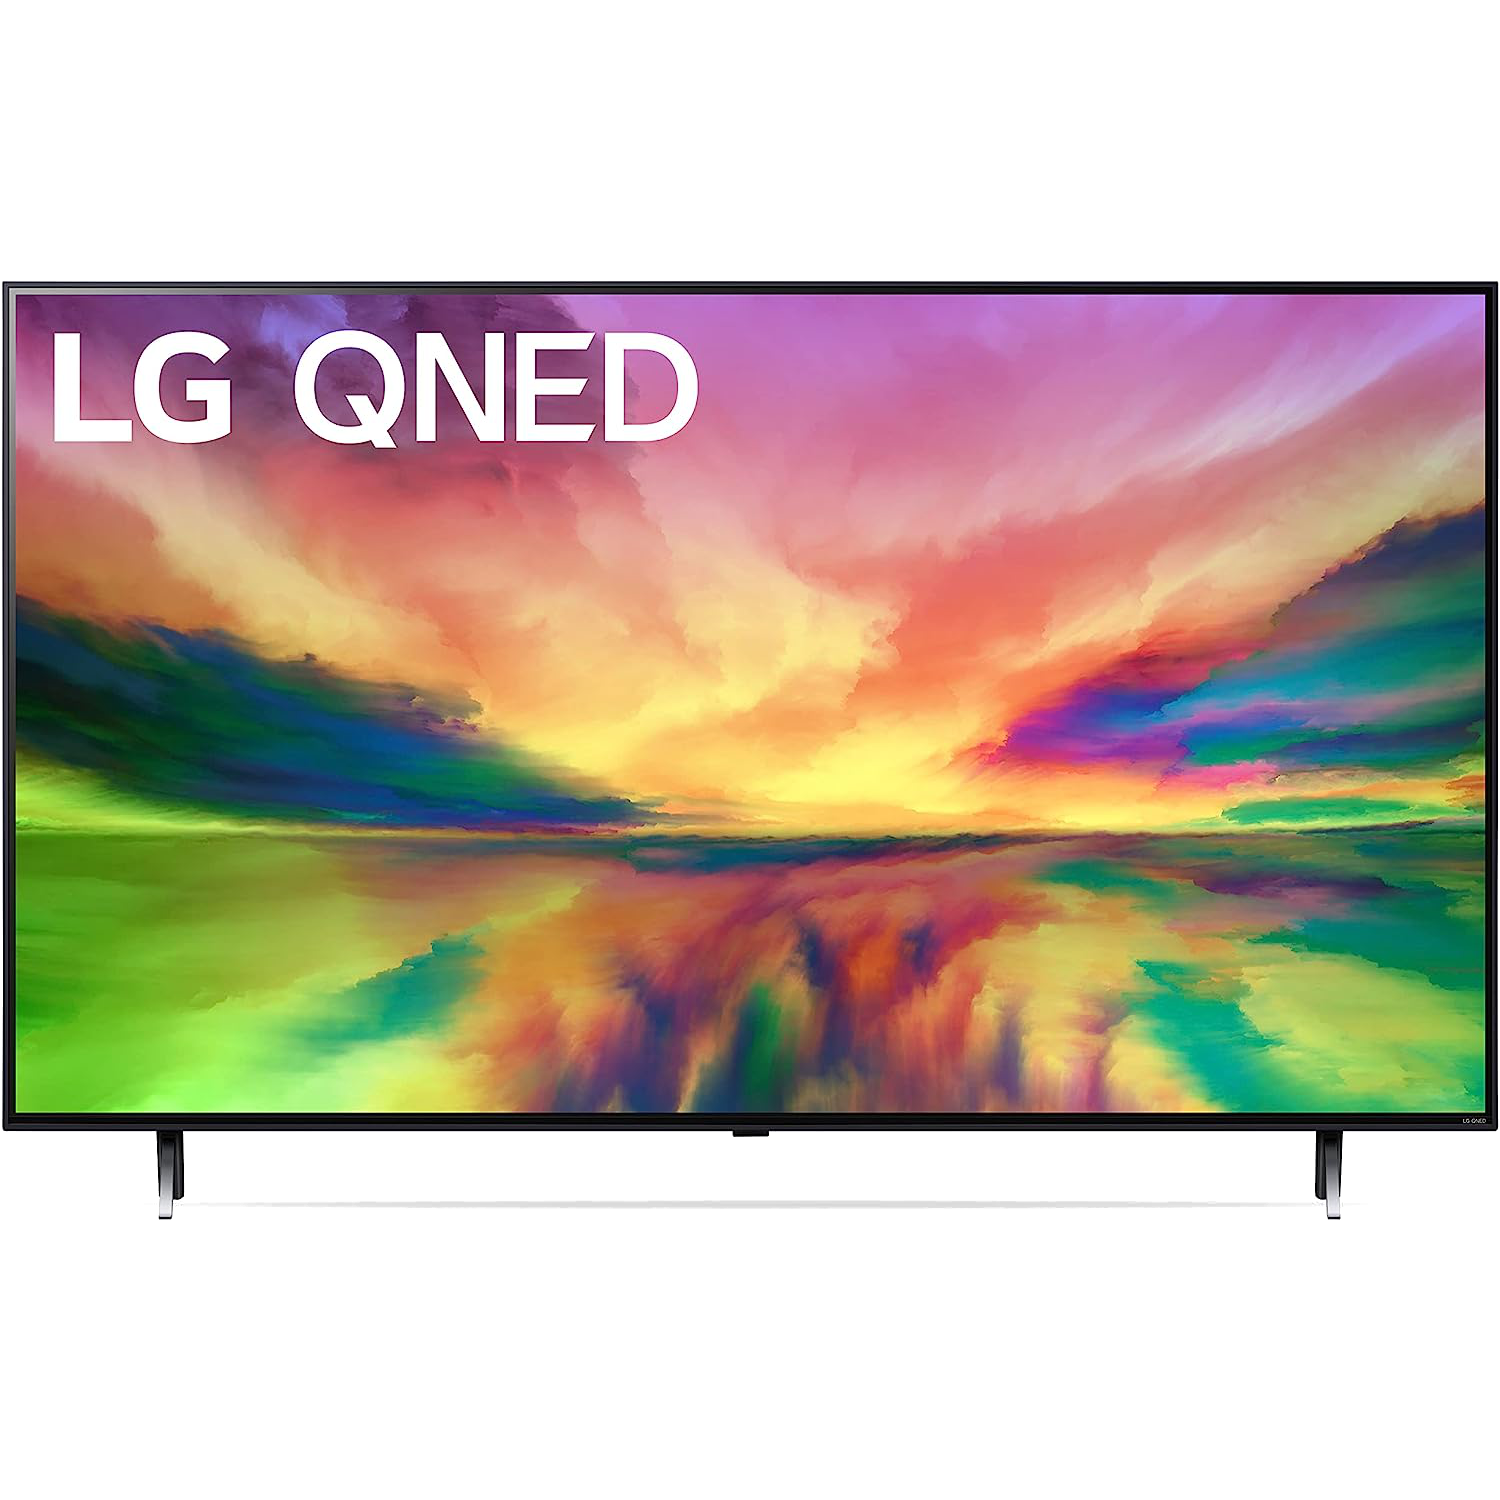 lg-qned80-65-inch-render-01